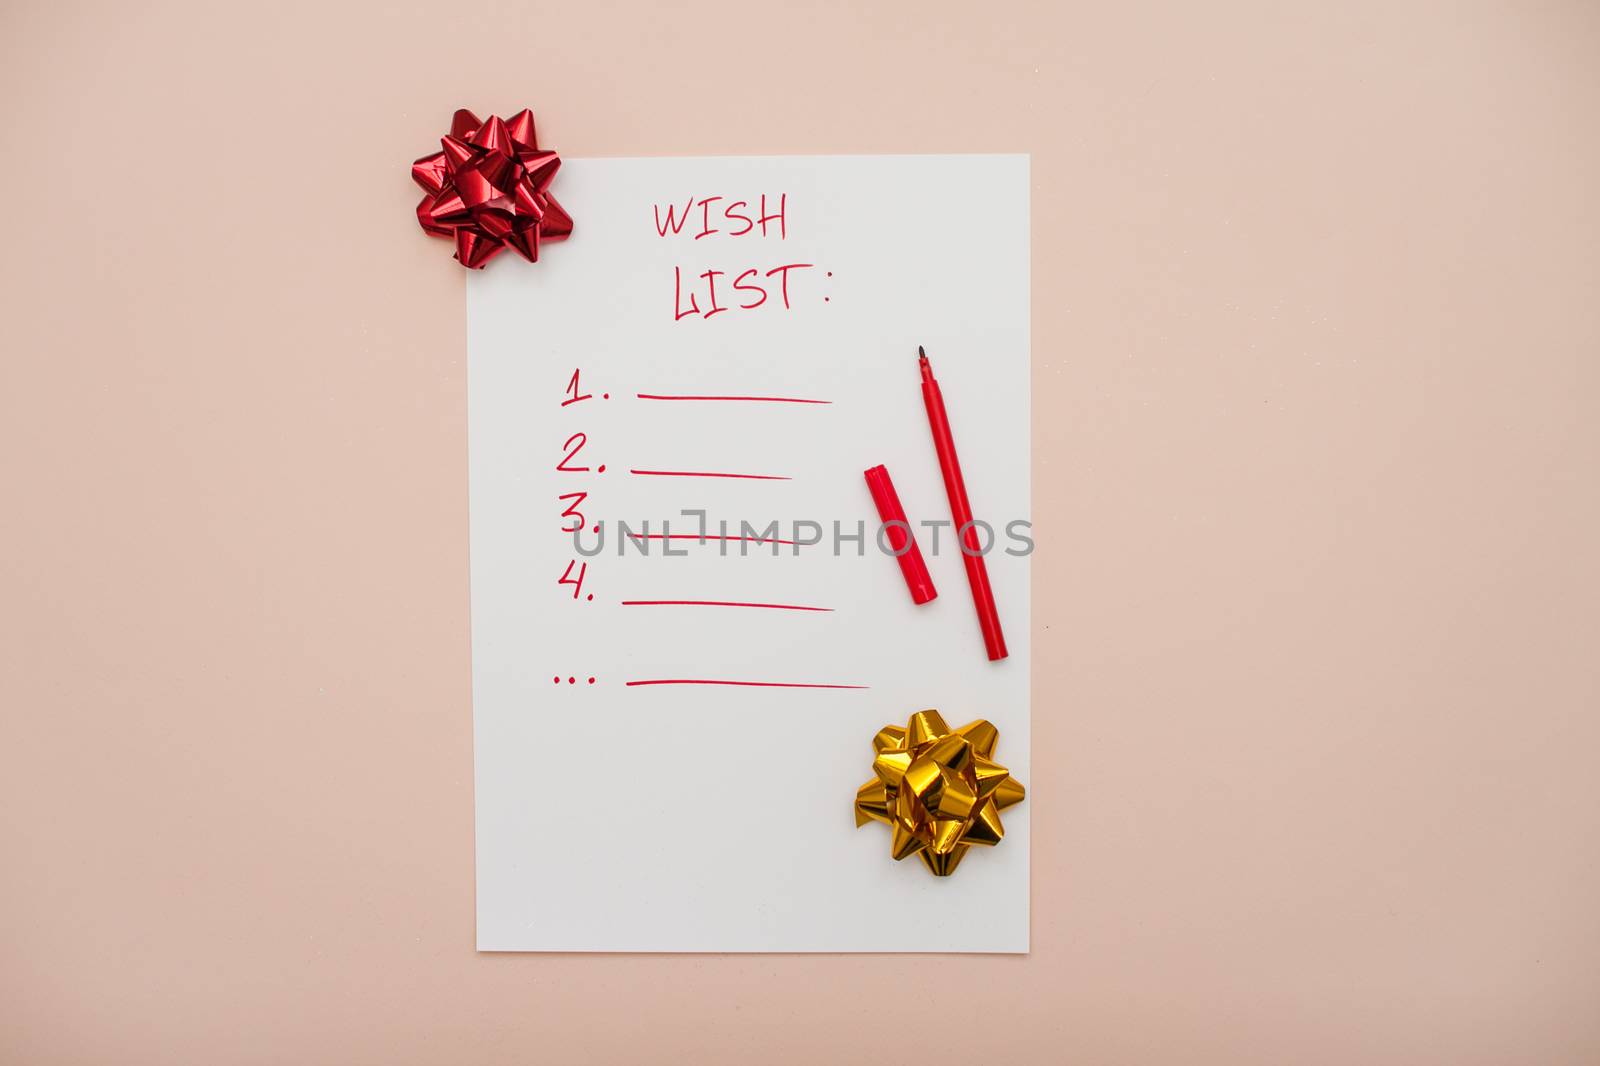 Inscription in red felt-tip pen wish list on a white blank sheet of paper. New Year's wish list. Letter to Santa Claus